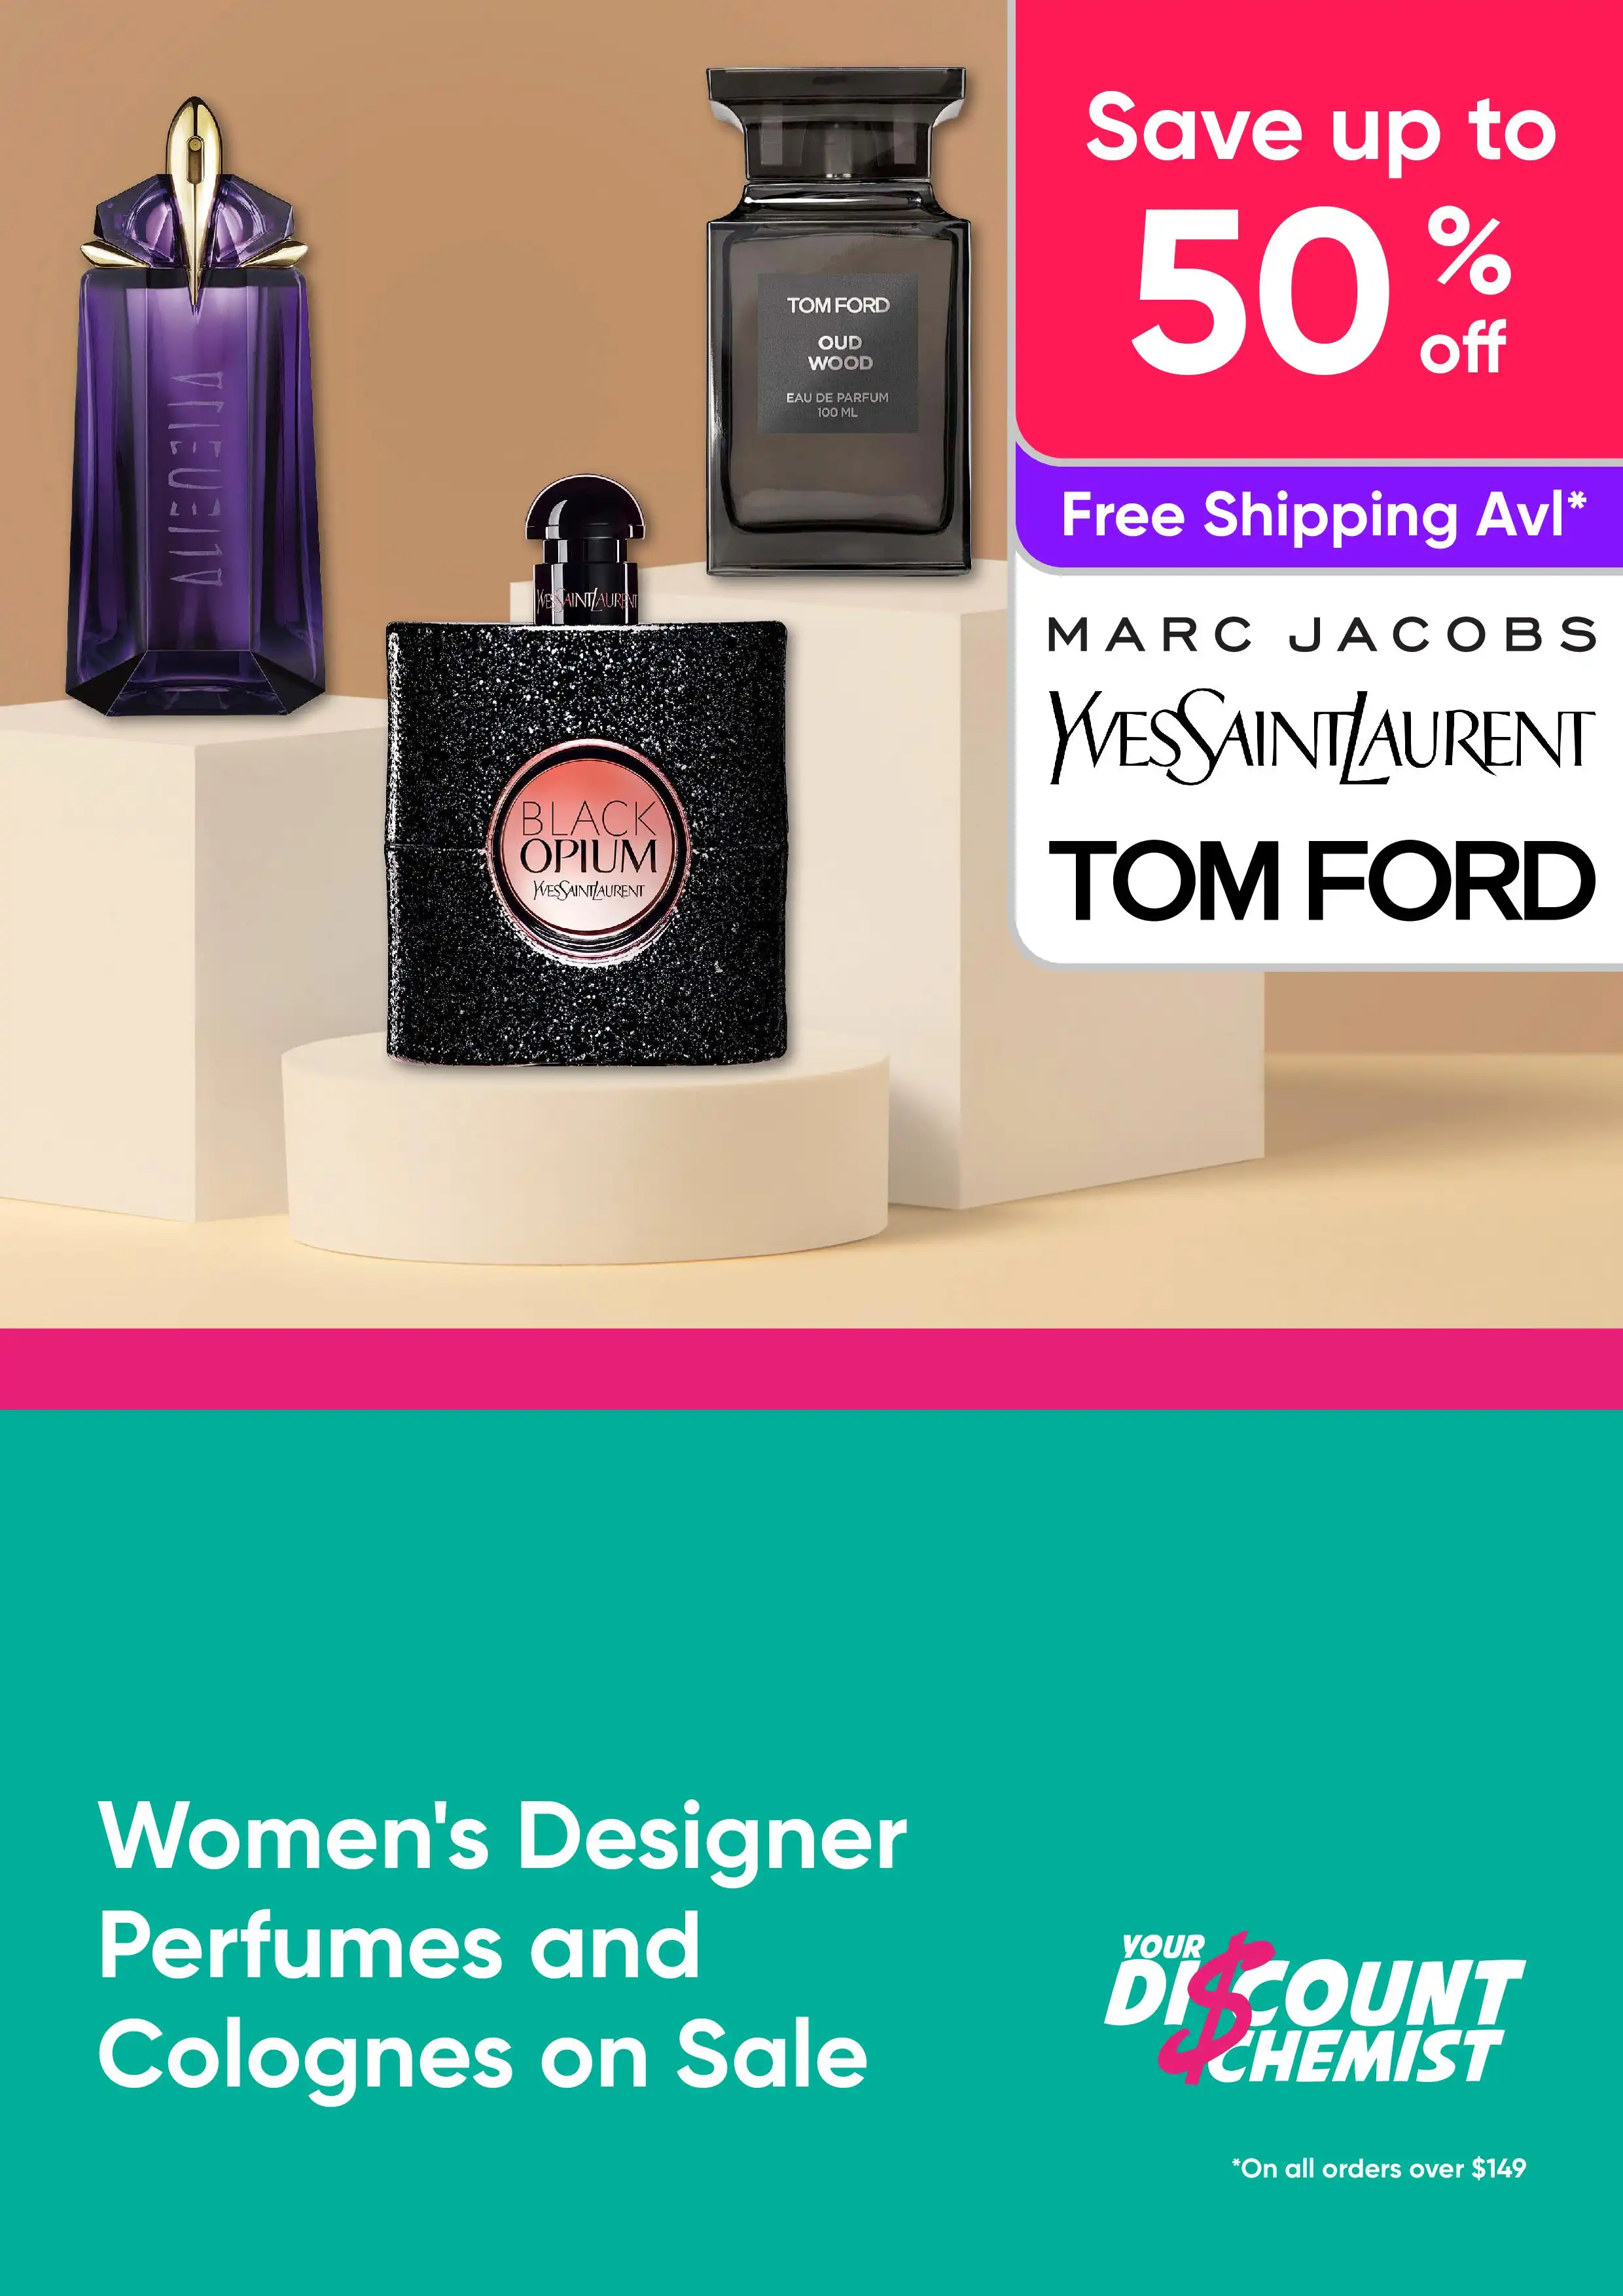 Women's Designer Perfumes and Colognes on Sale up to 50% Off RRPs